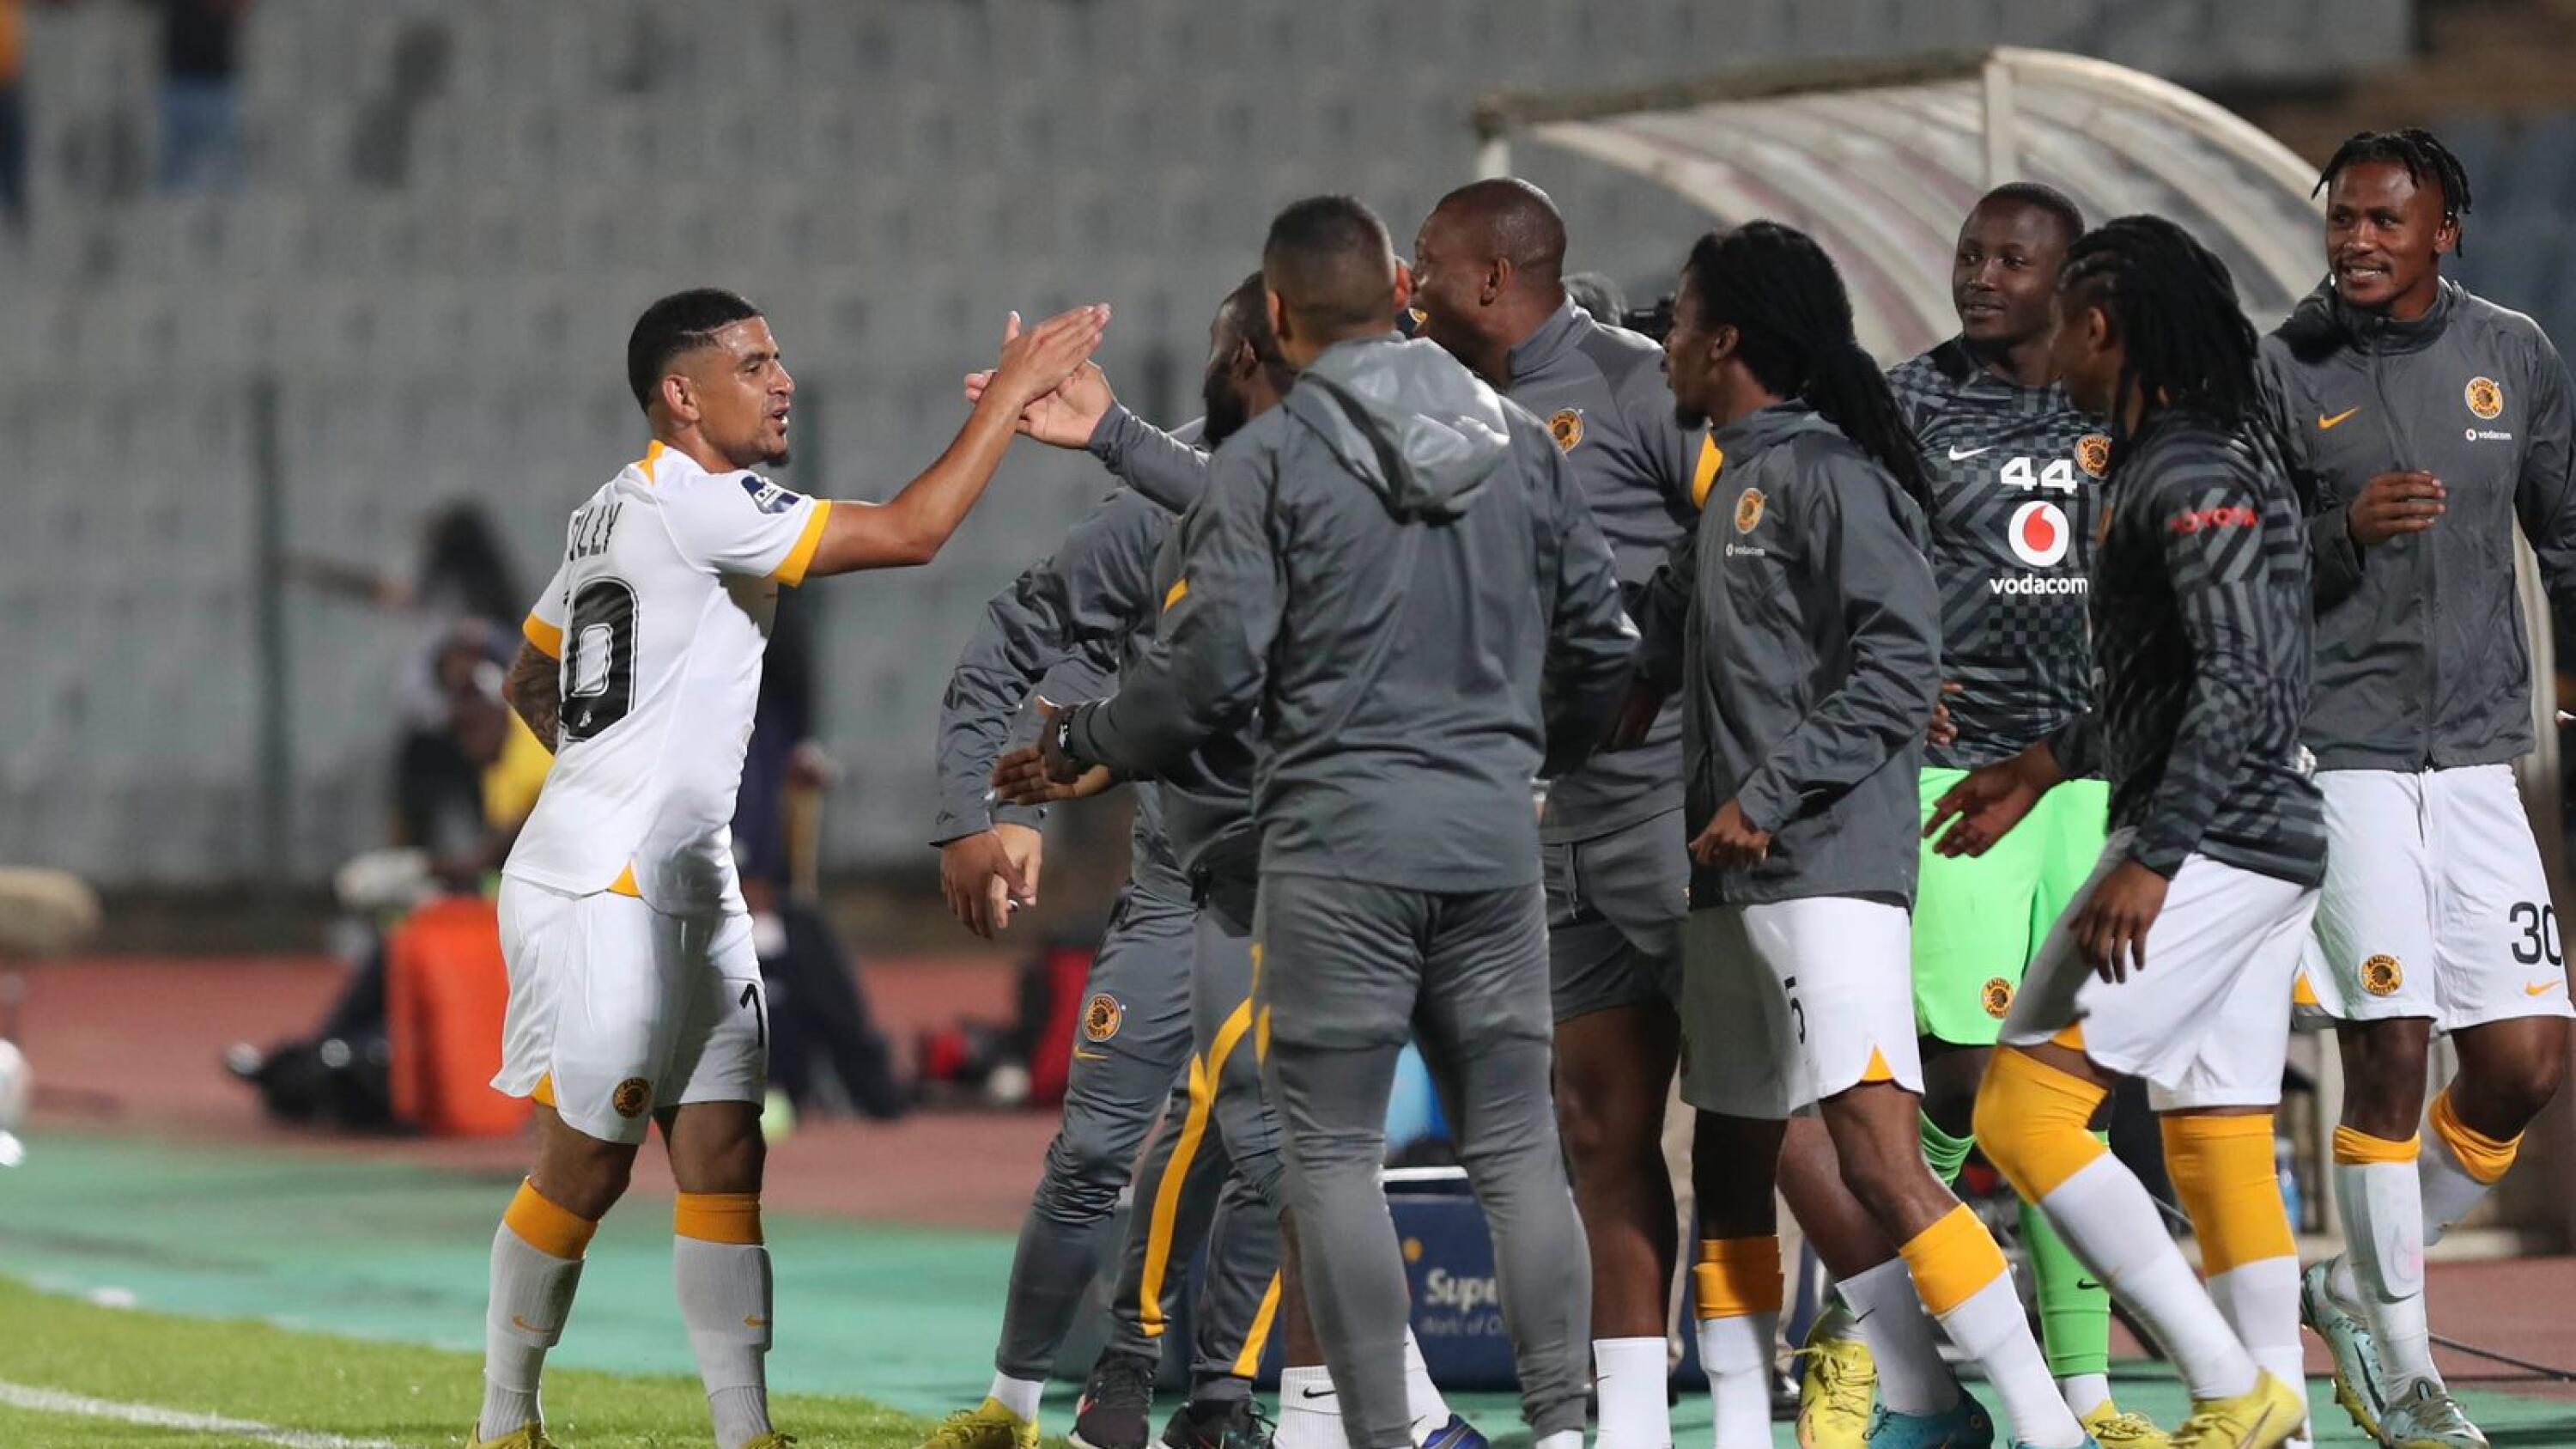 Kaizer Chiefs’ Keagan Dolly celebrates with teammates after scoring a goal during their DStv Premiership match against Swallows FC at Dobsonville Stadium in Johannesburg on Wednesday